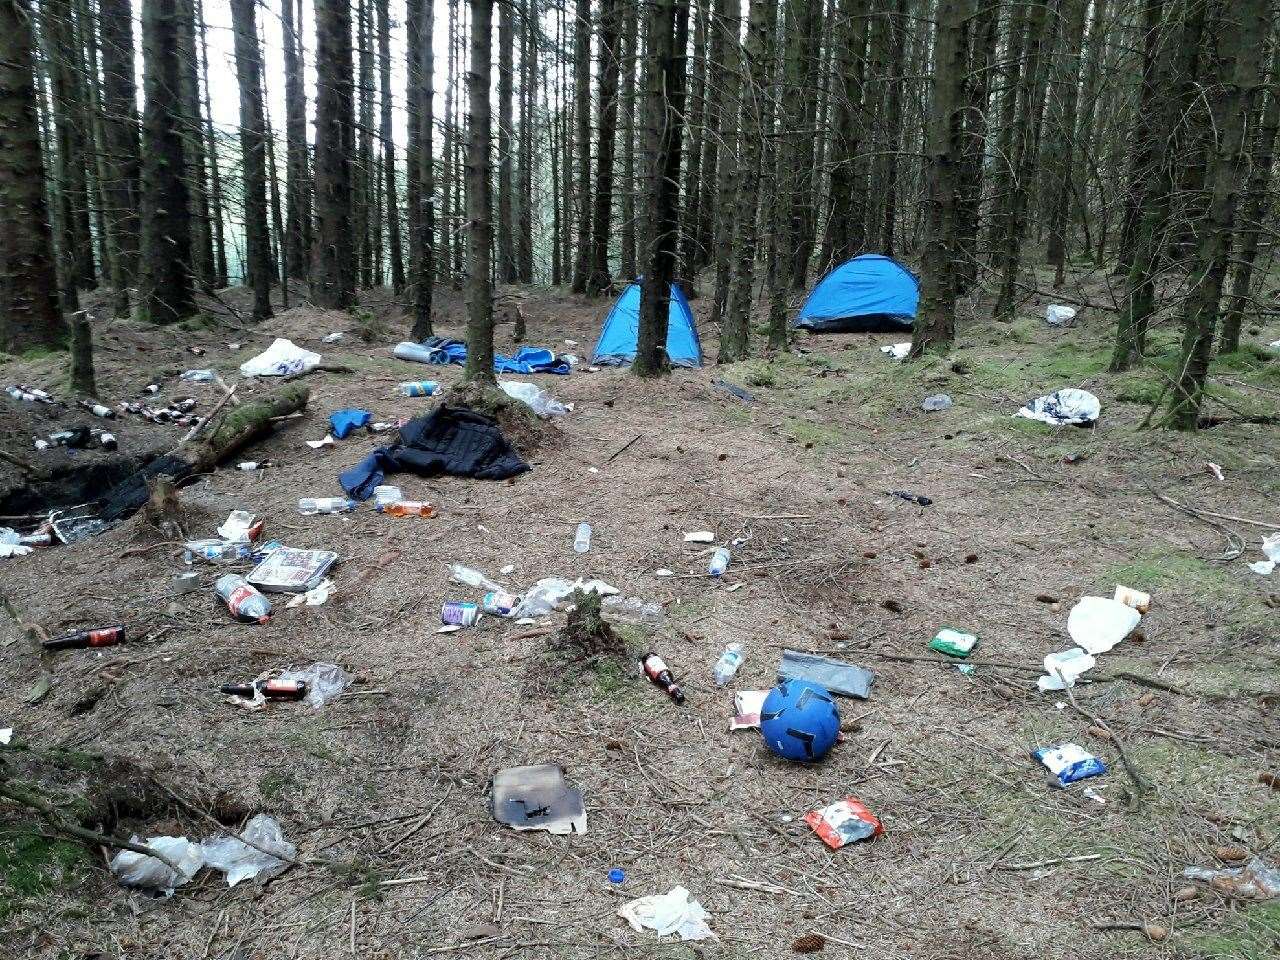 Litter has been a serious problem at some sites around Scotland in recent weeks, with those responsible being described as selfish and irresponsible.